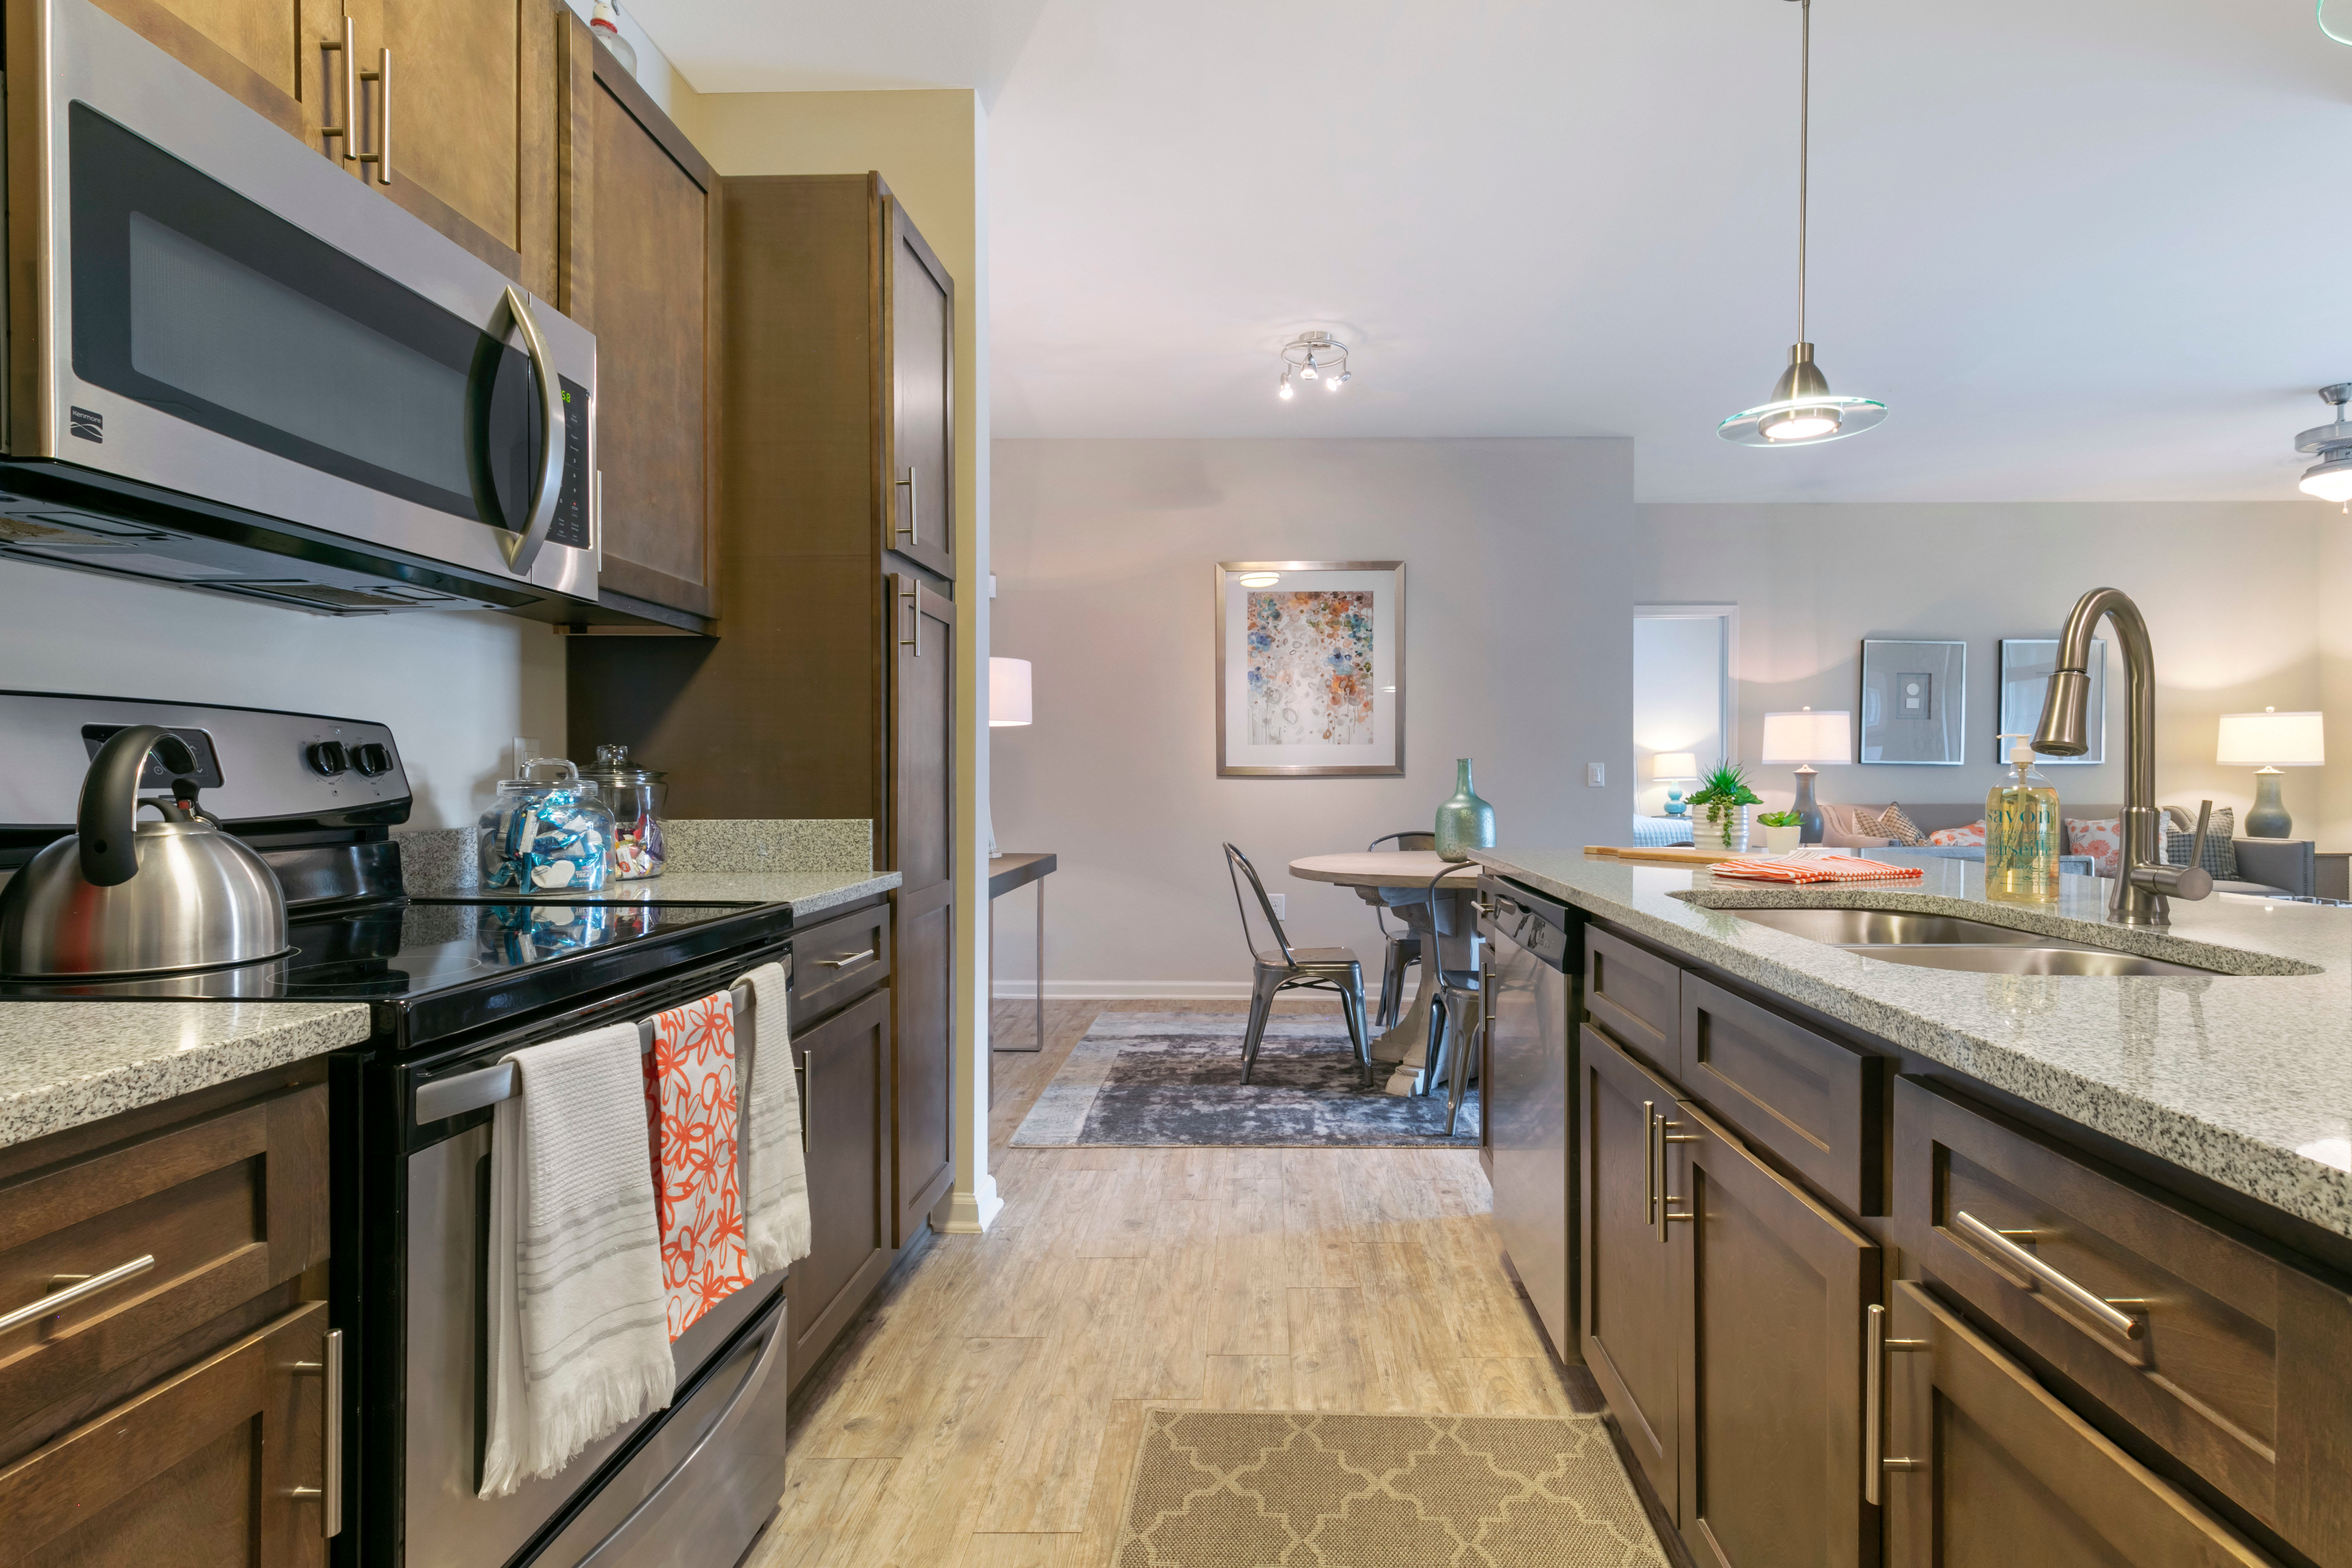 Modern kitchen with granite countertops and stainless steel appliances at The Village at Apison Pike in Ooltewah, Tennessee